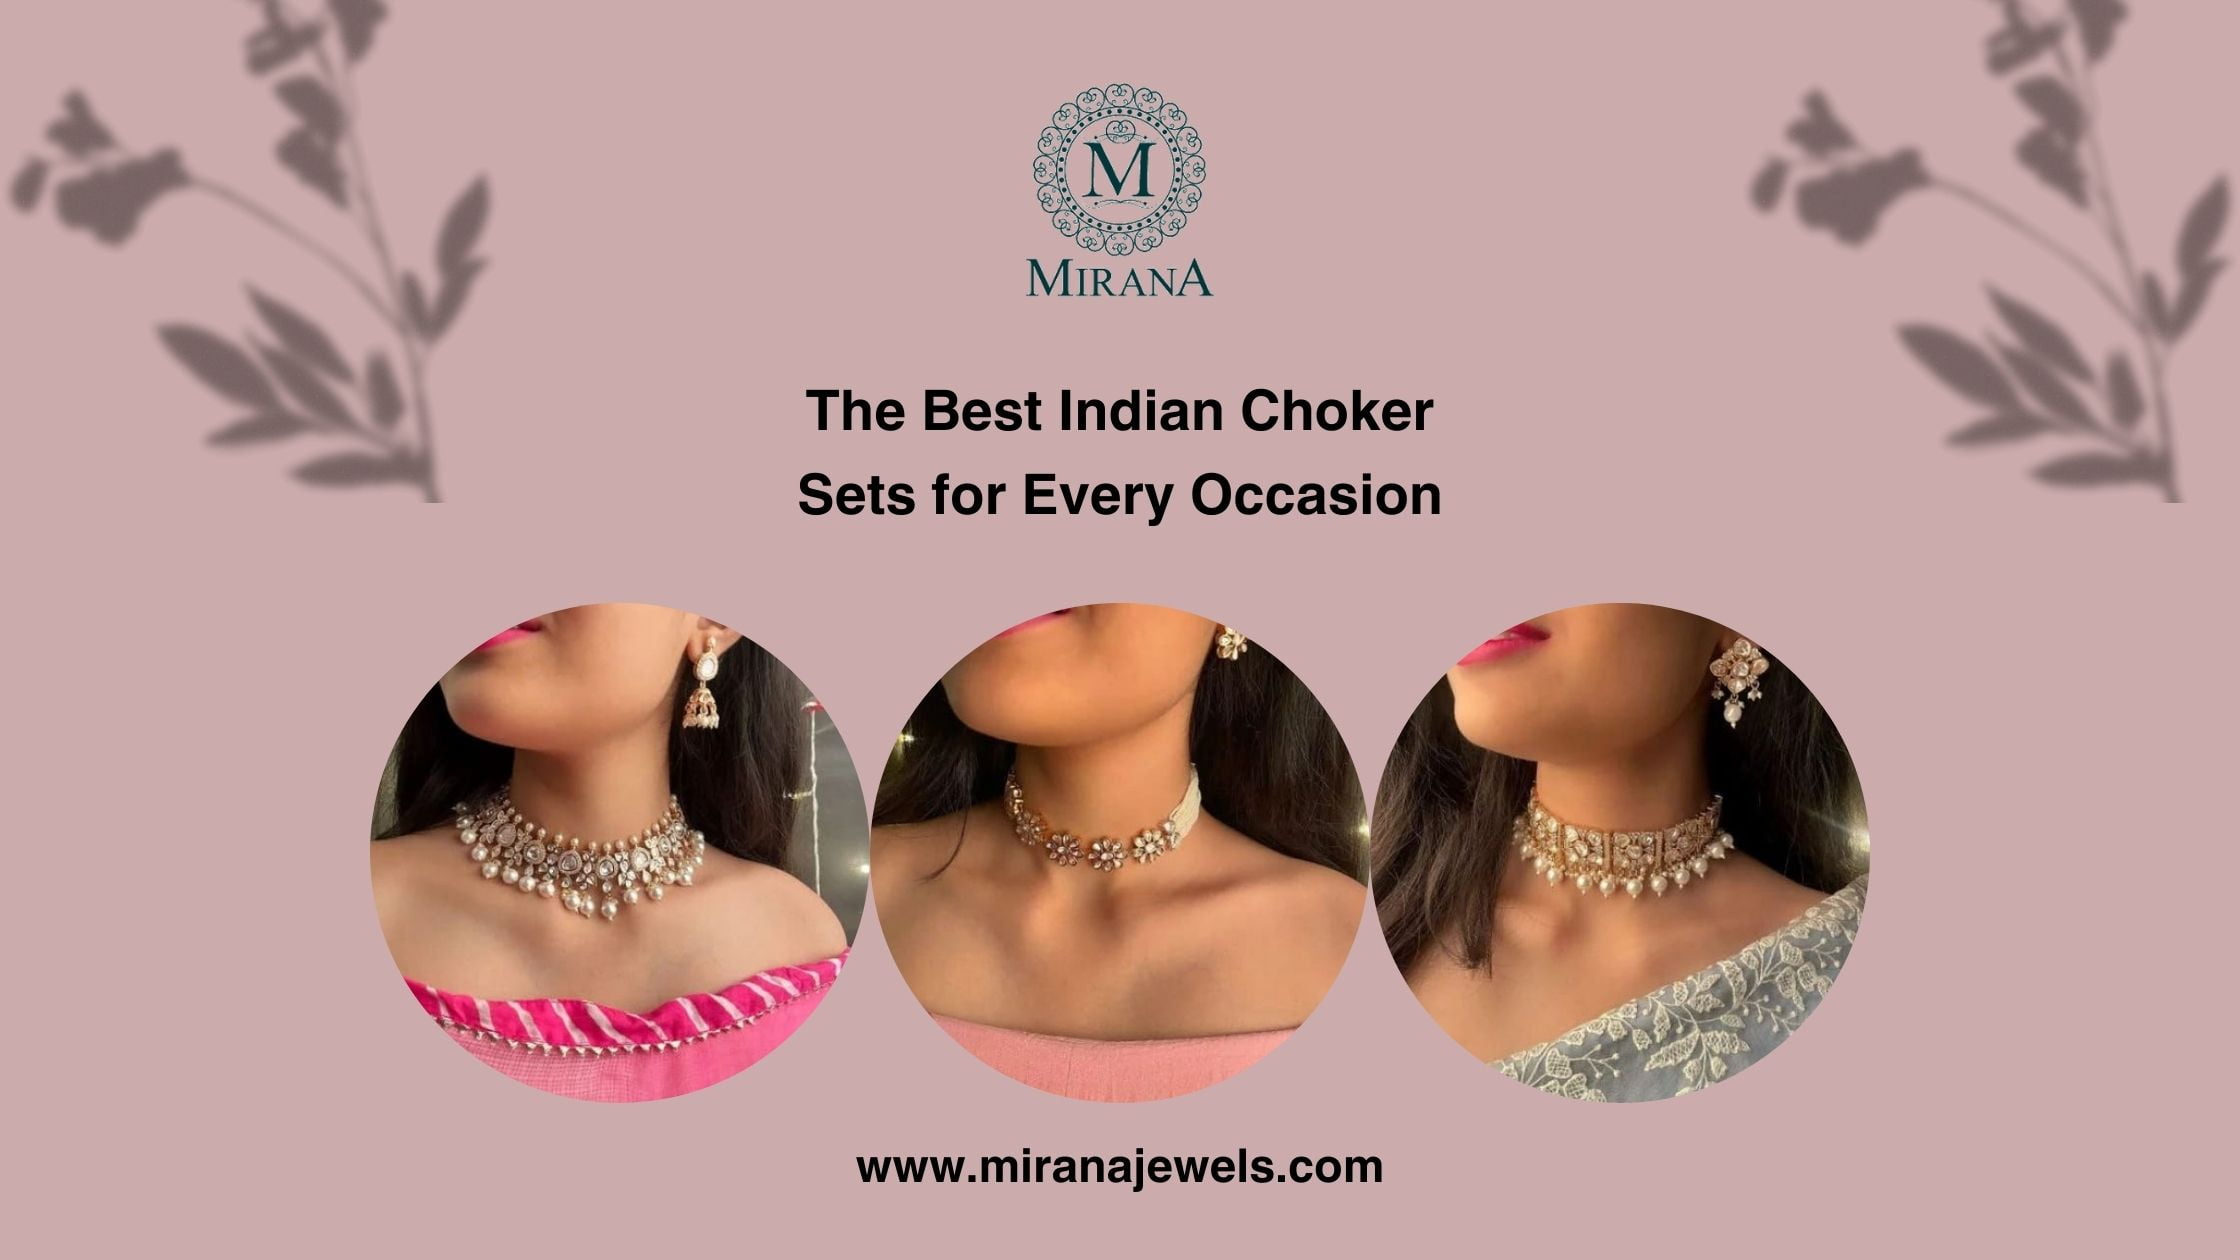 The Best Indian Choker Sets for Every Occasion